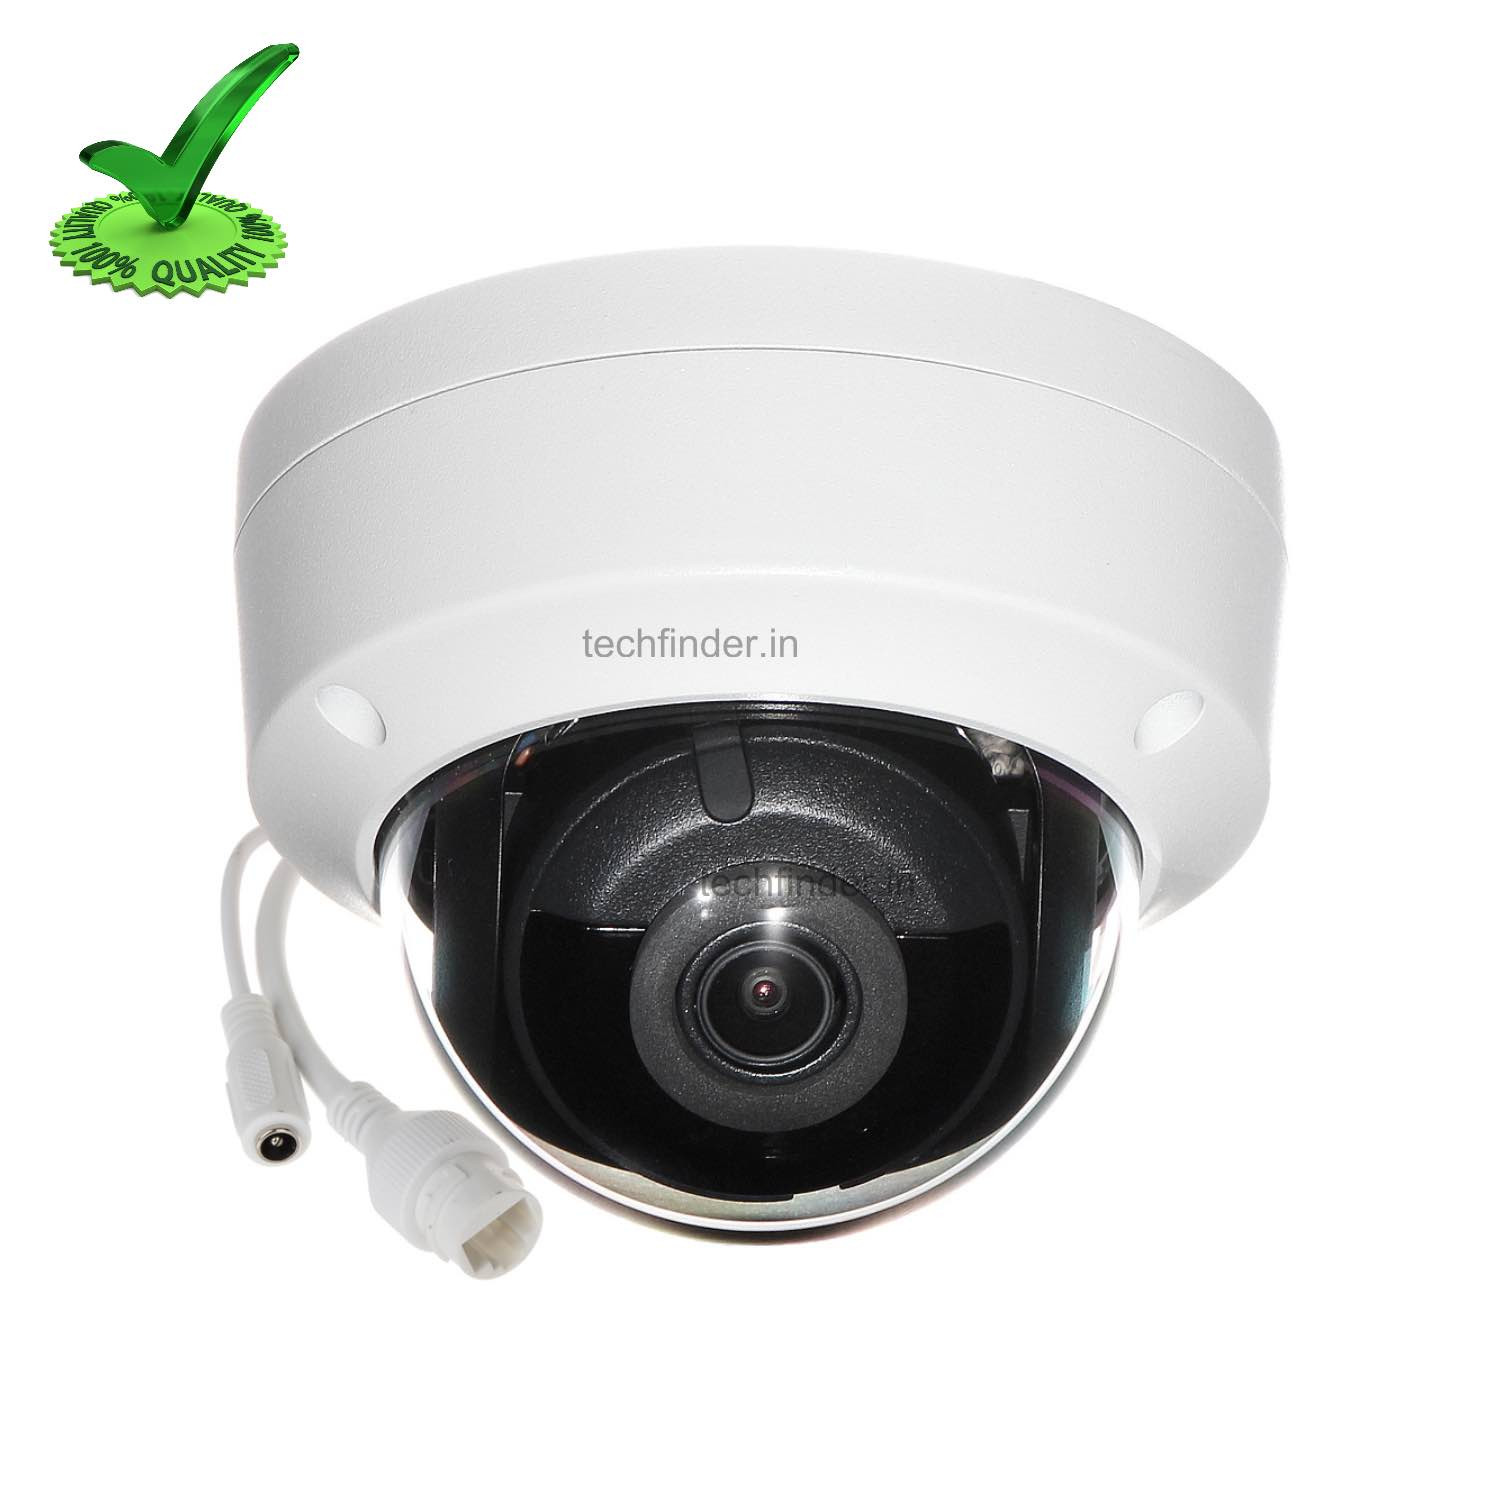 Hikvision DS-2CD2143G0-IU 4MP IP Dome Camera